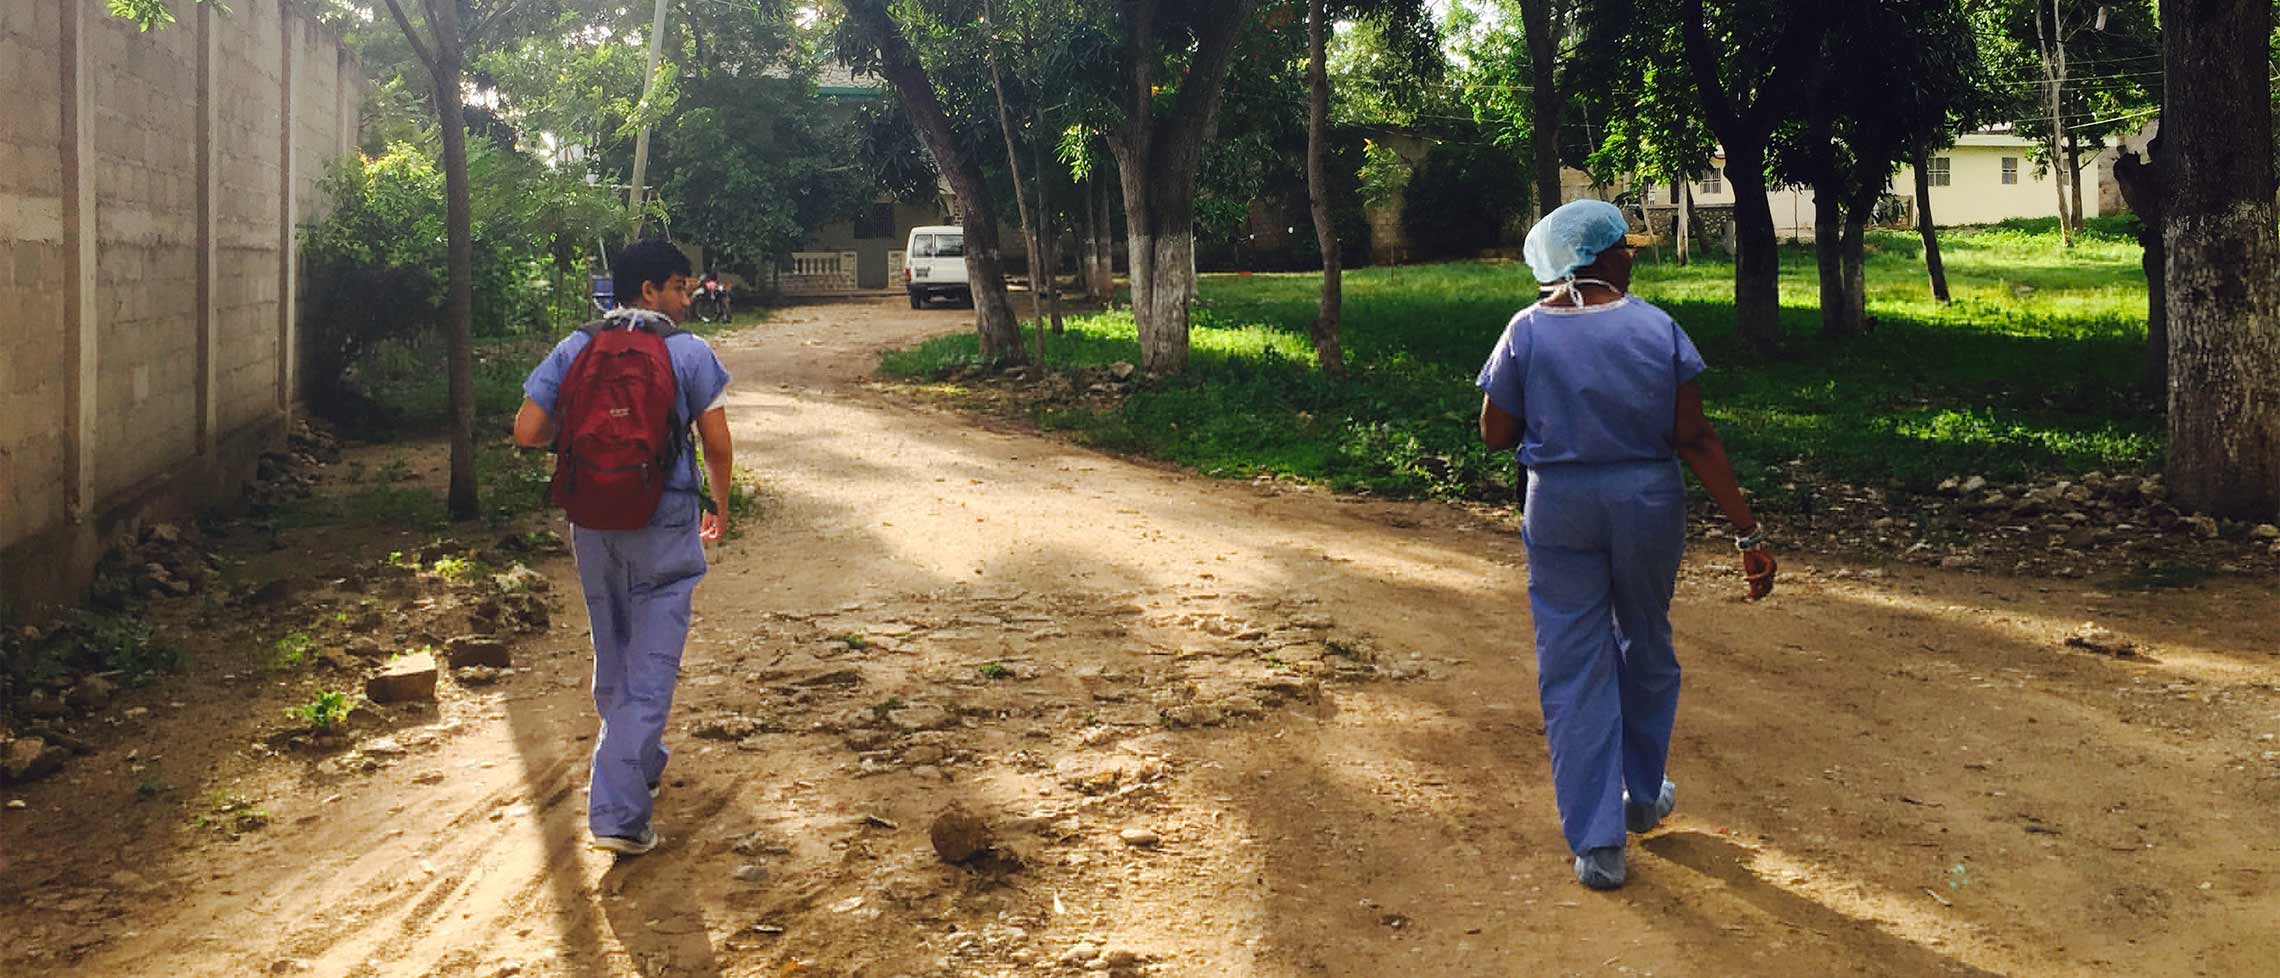 An Emory medical student and nurse walk home from the hospital. Elizabeth Carter, SOM. Haiti.